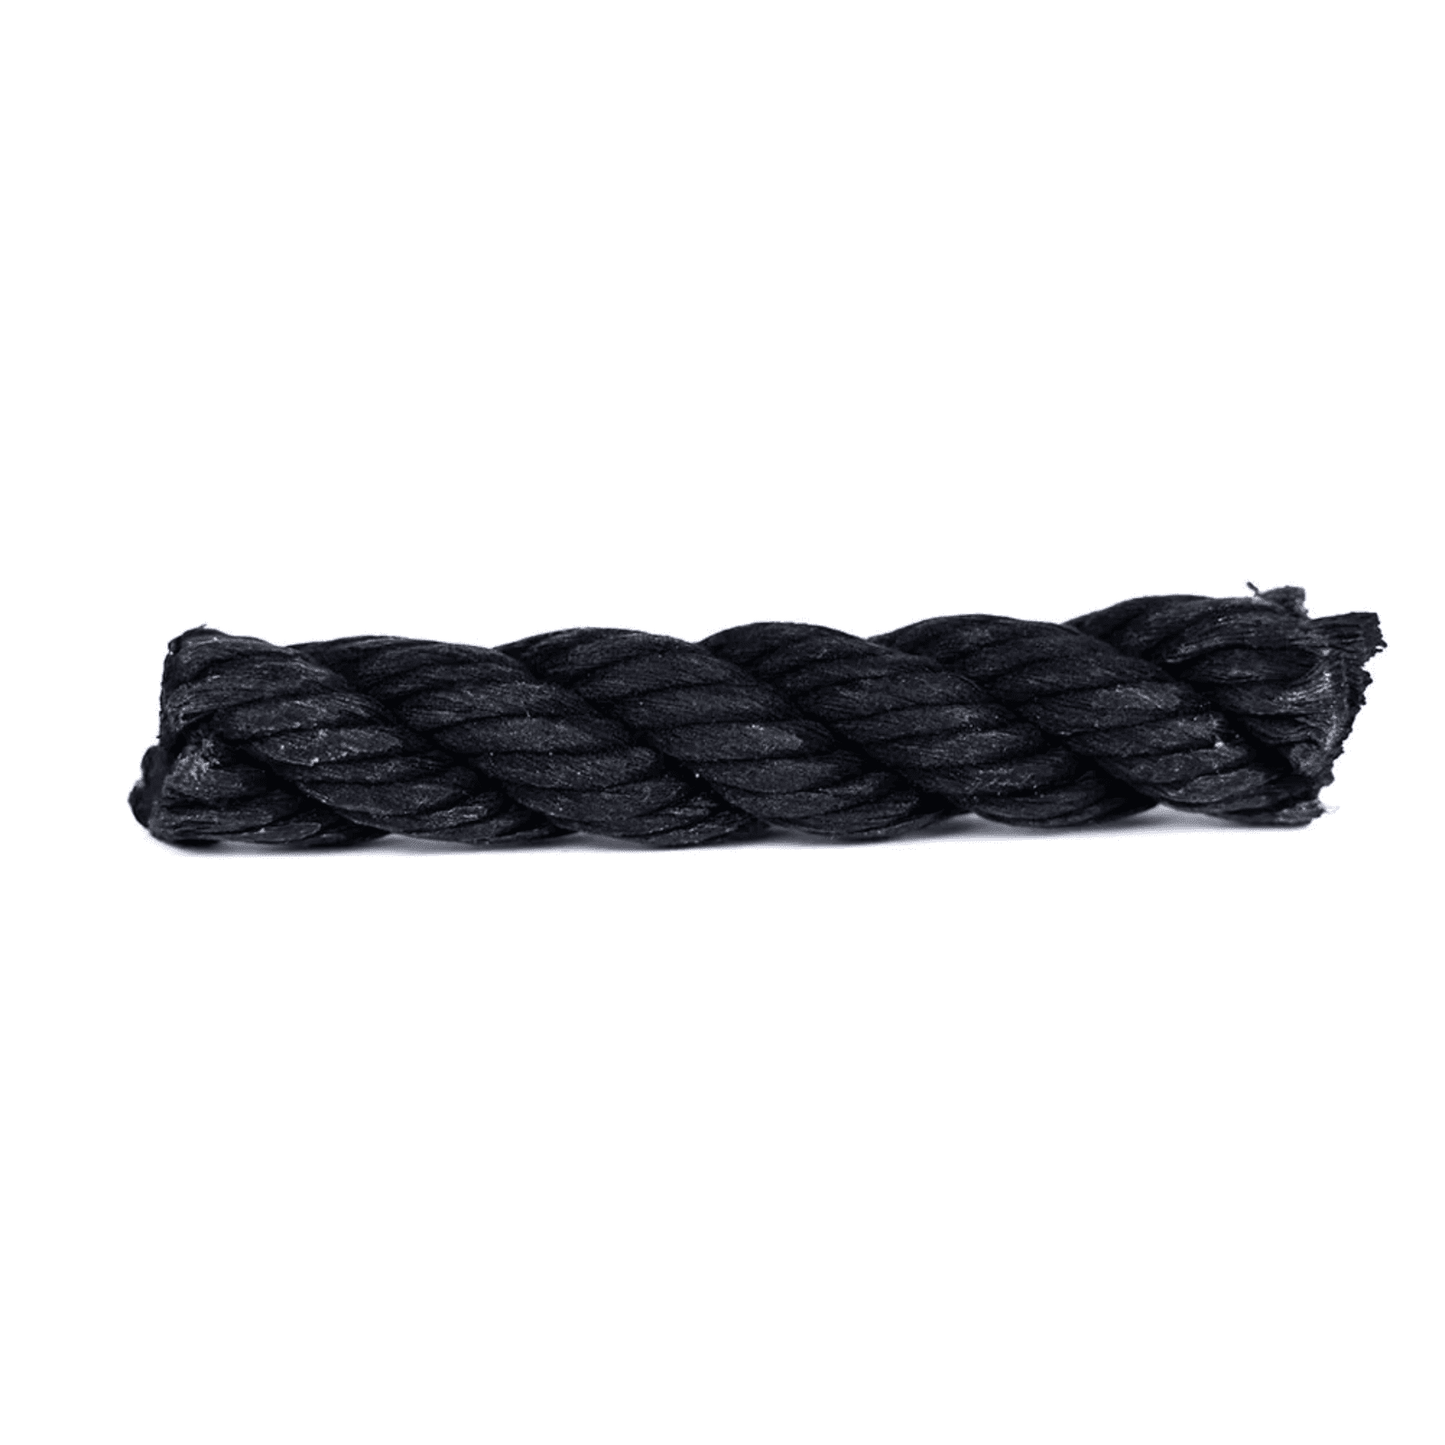 Fire Rope - 2 pack